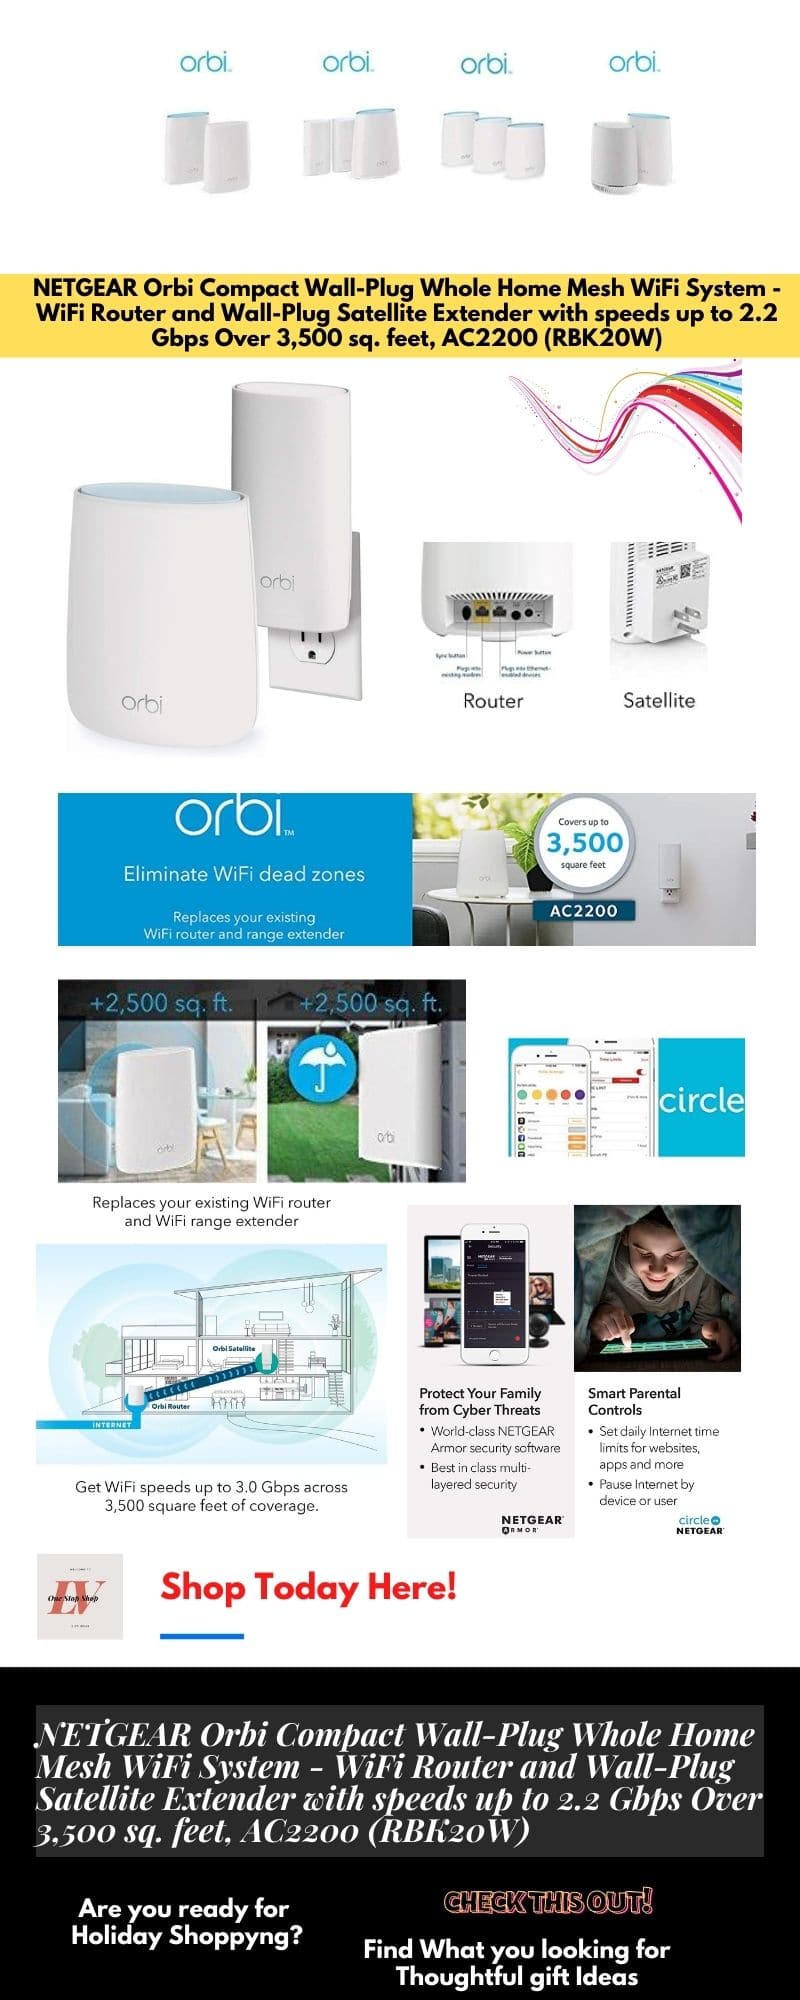 NETGEAR Orbi Compact Wall-Plug Whole Home Mesh WiFi System - WiFi Router and Wall-Plug Satellite Extender with speeds up to 2.2 Gbps Over 3,500 sq. feet, AC2200 (RBK20W)